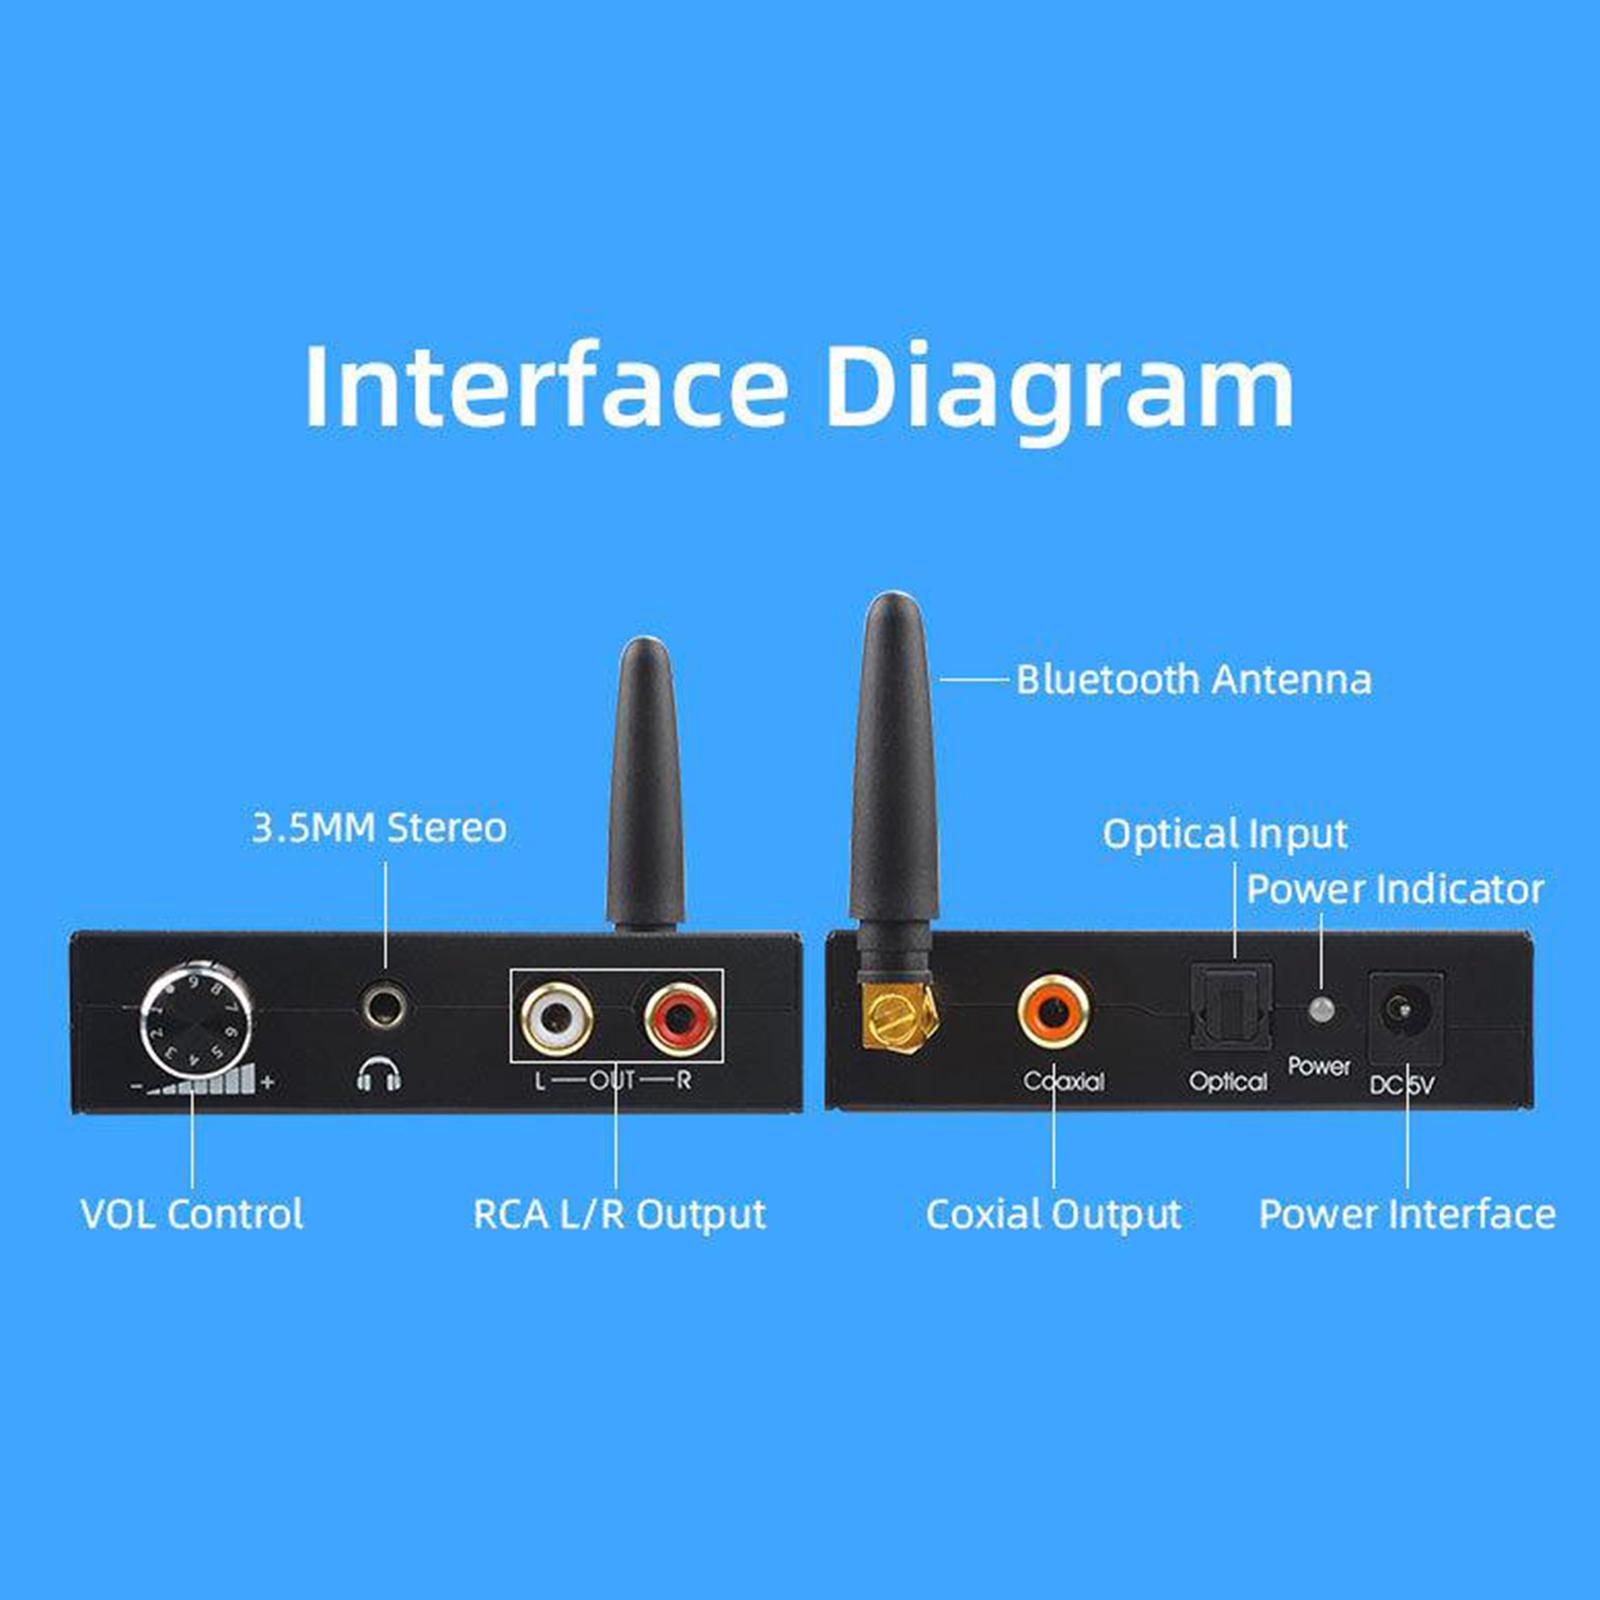 192kHz DAC Converter, Volume Adjustable, Bluetooth 5.0 Receiver, Digital Optical Coaxial to Analog Stereo Audio L/R RCA 3.5mm Jack Audio Adapter